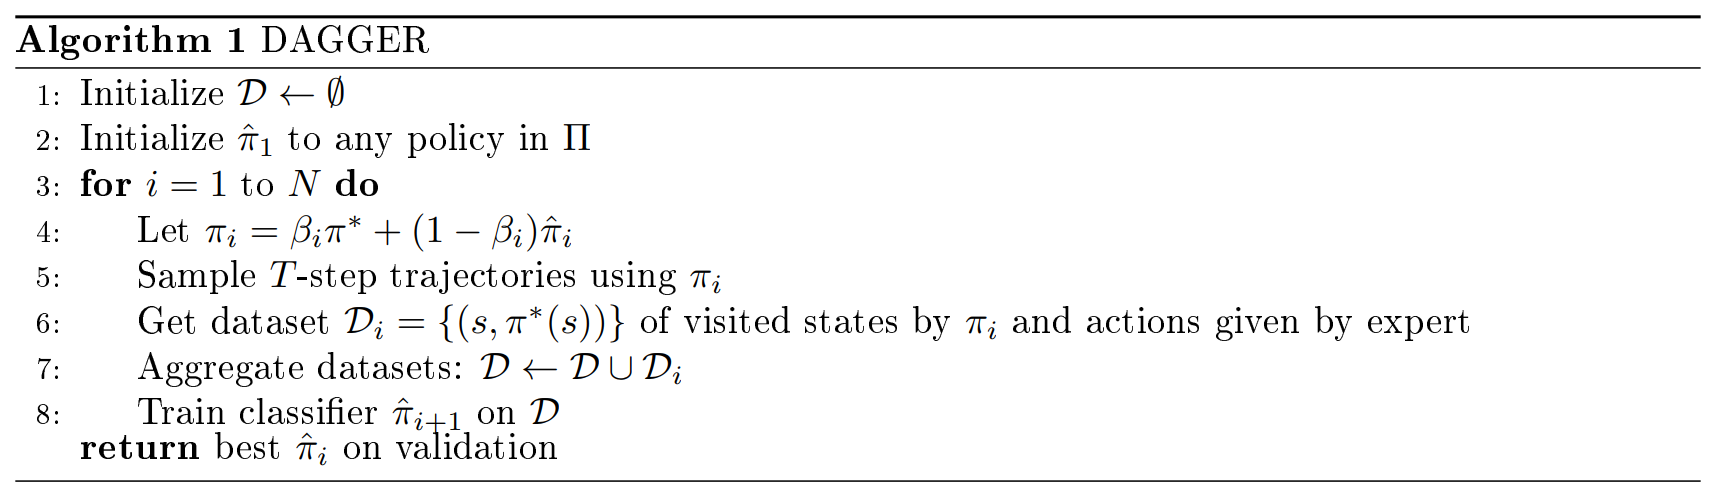 docs/stanford-cs234-notes-zh/img/fig7_alg_1.png